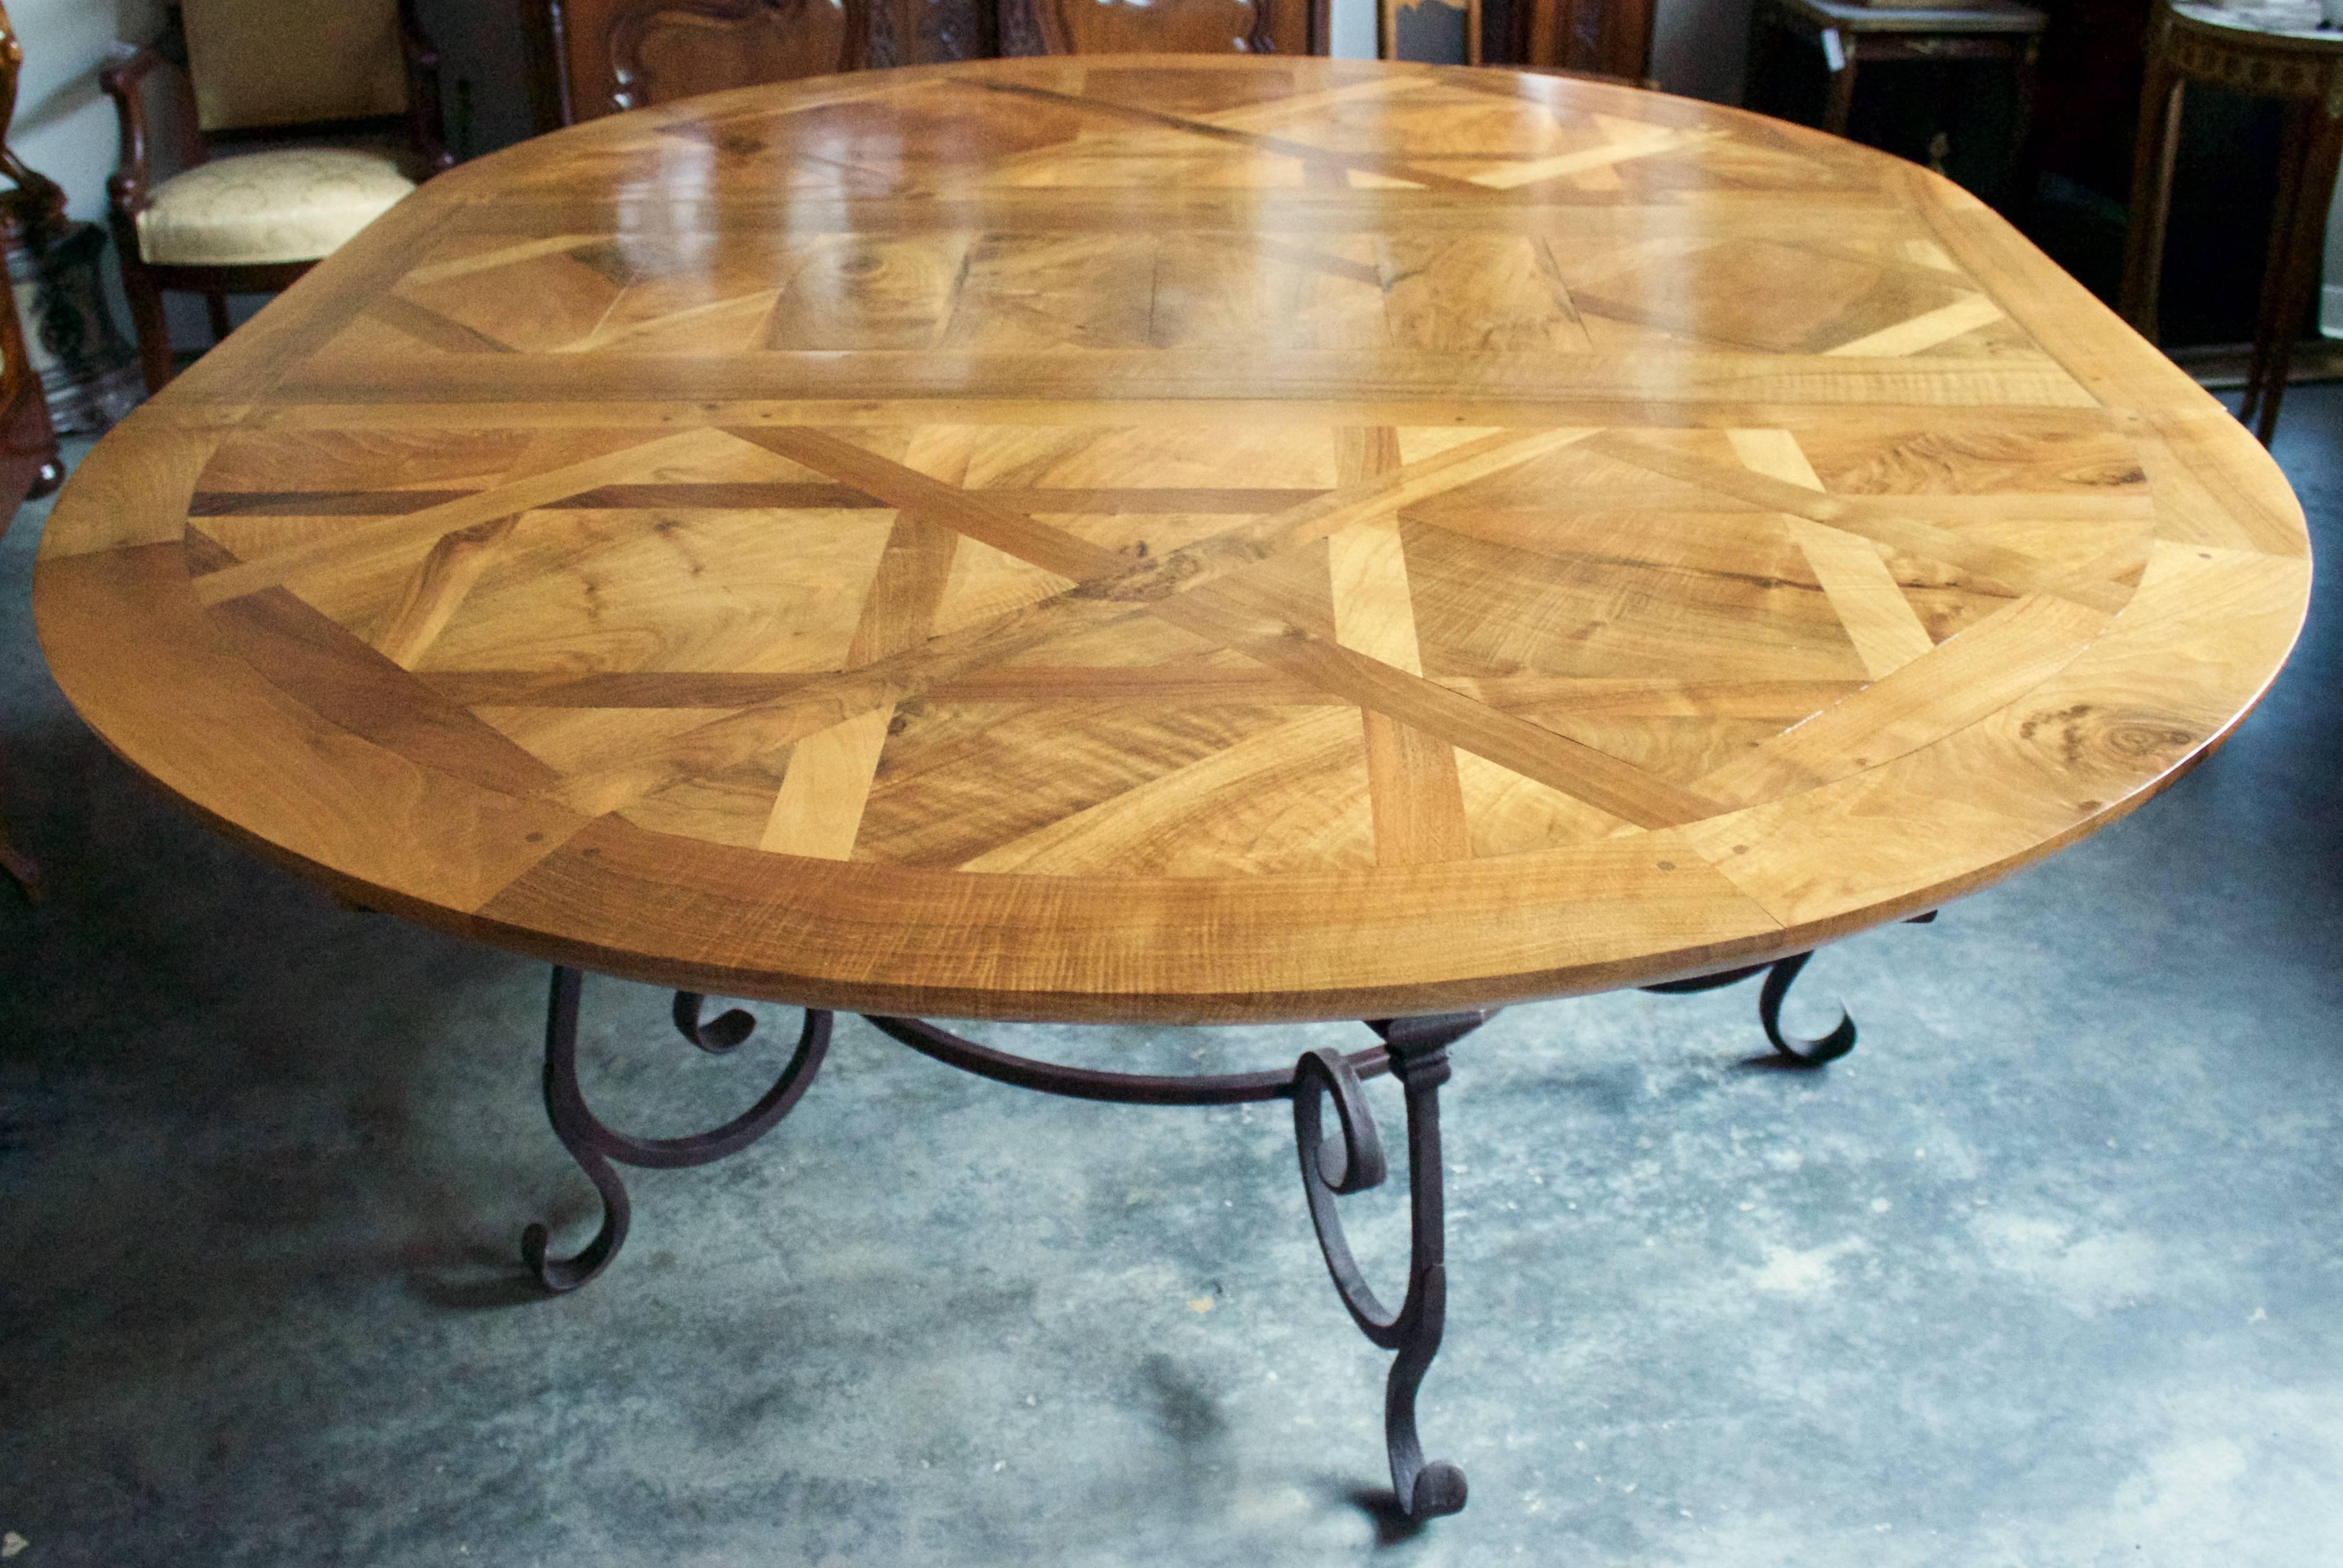 Gorgeous parquet top table that can be used round or oval due to a single central leaf. Can seat -when  oval- 12 to 14 people.Made of French walnut top resting on a beautifully scrolled wrought iron base.